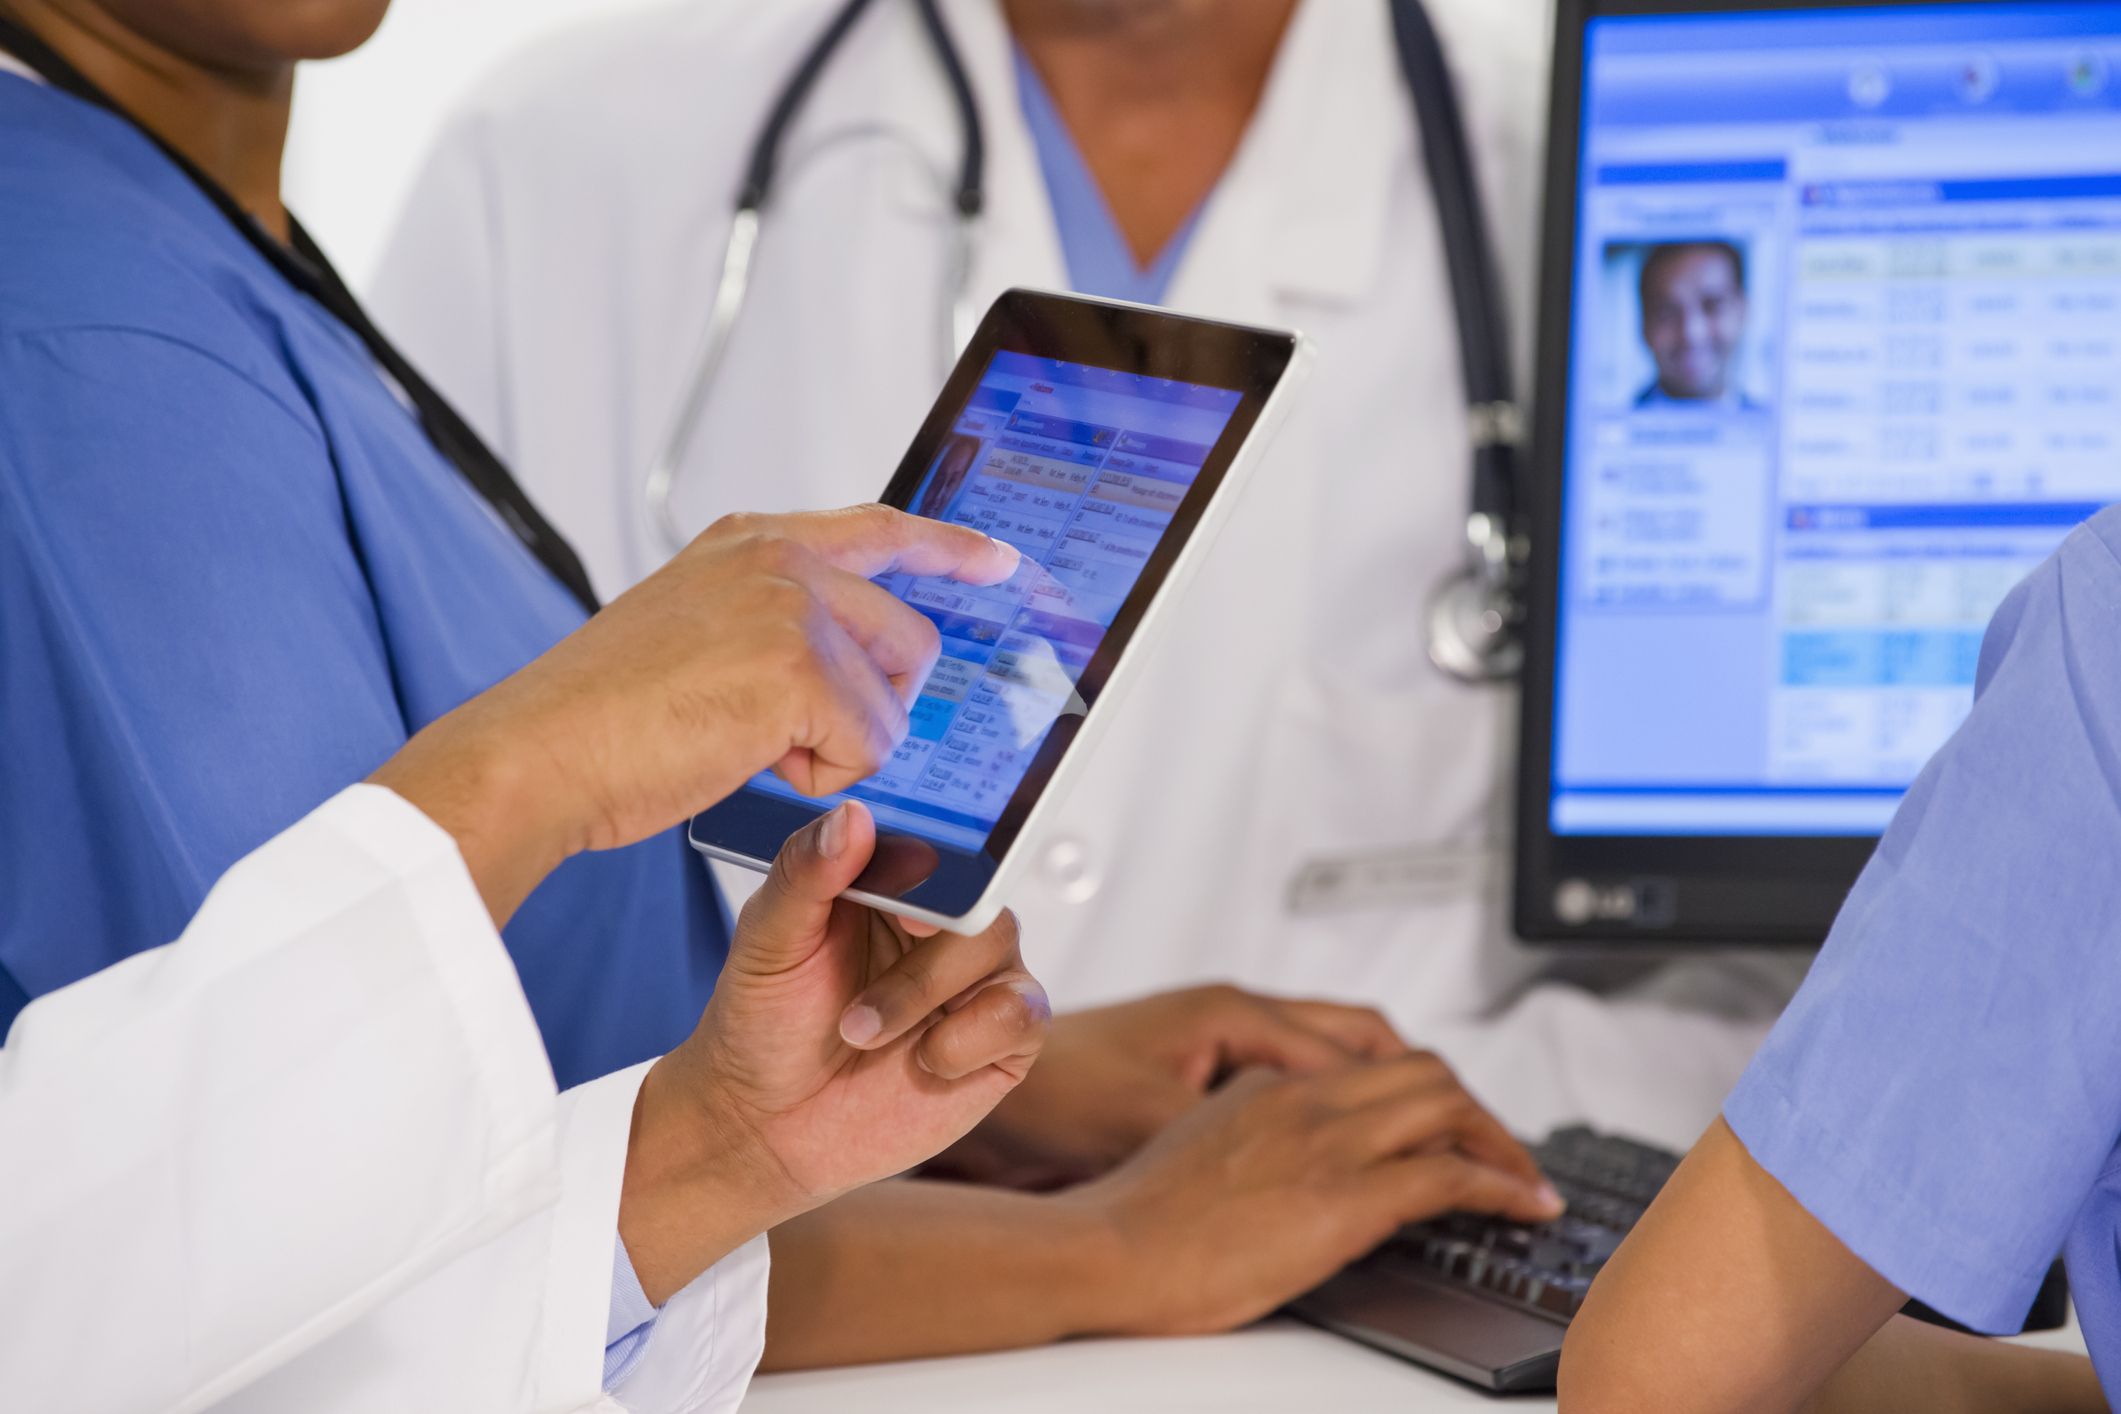 How the Future of Technology Can Make Your Hospital a Model of Care and Efficiency